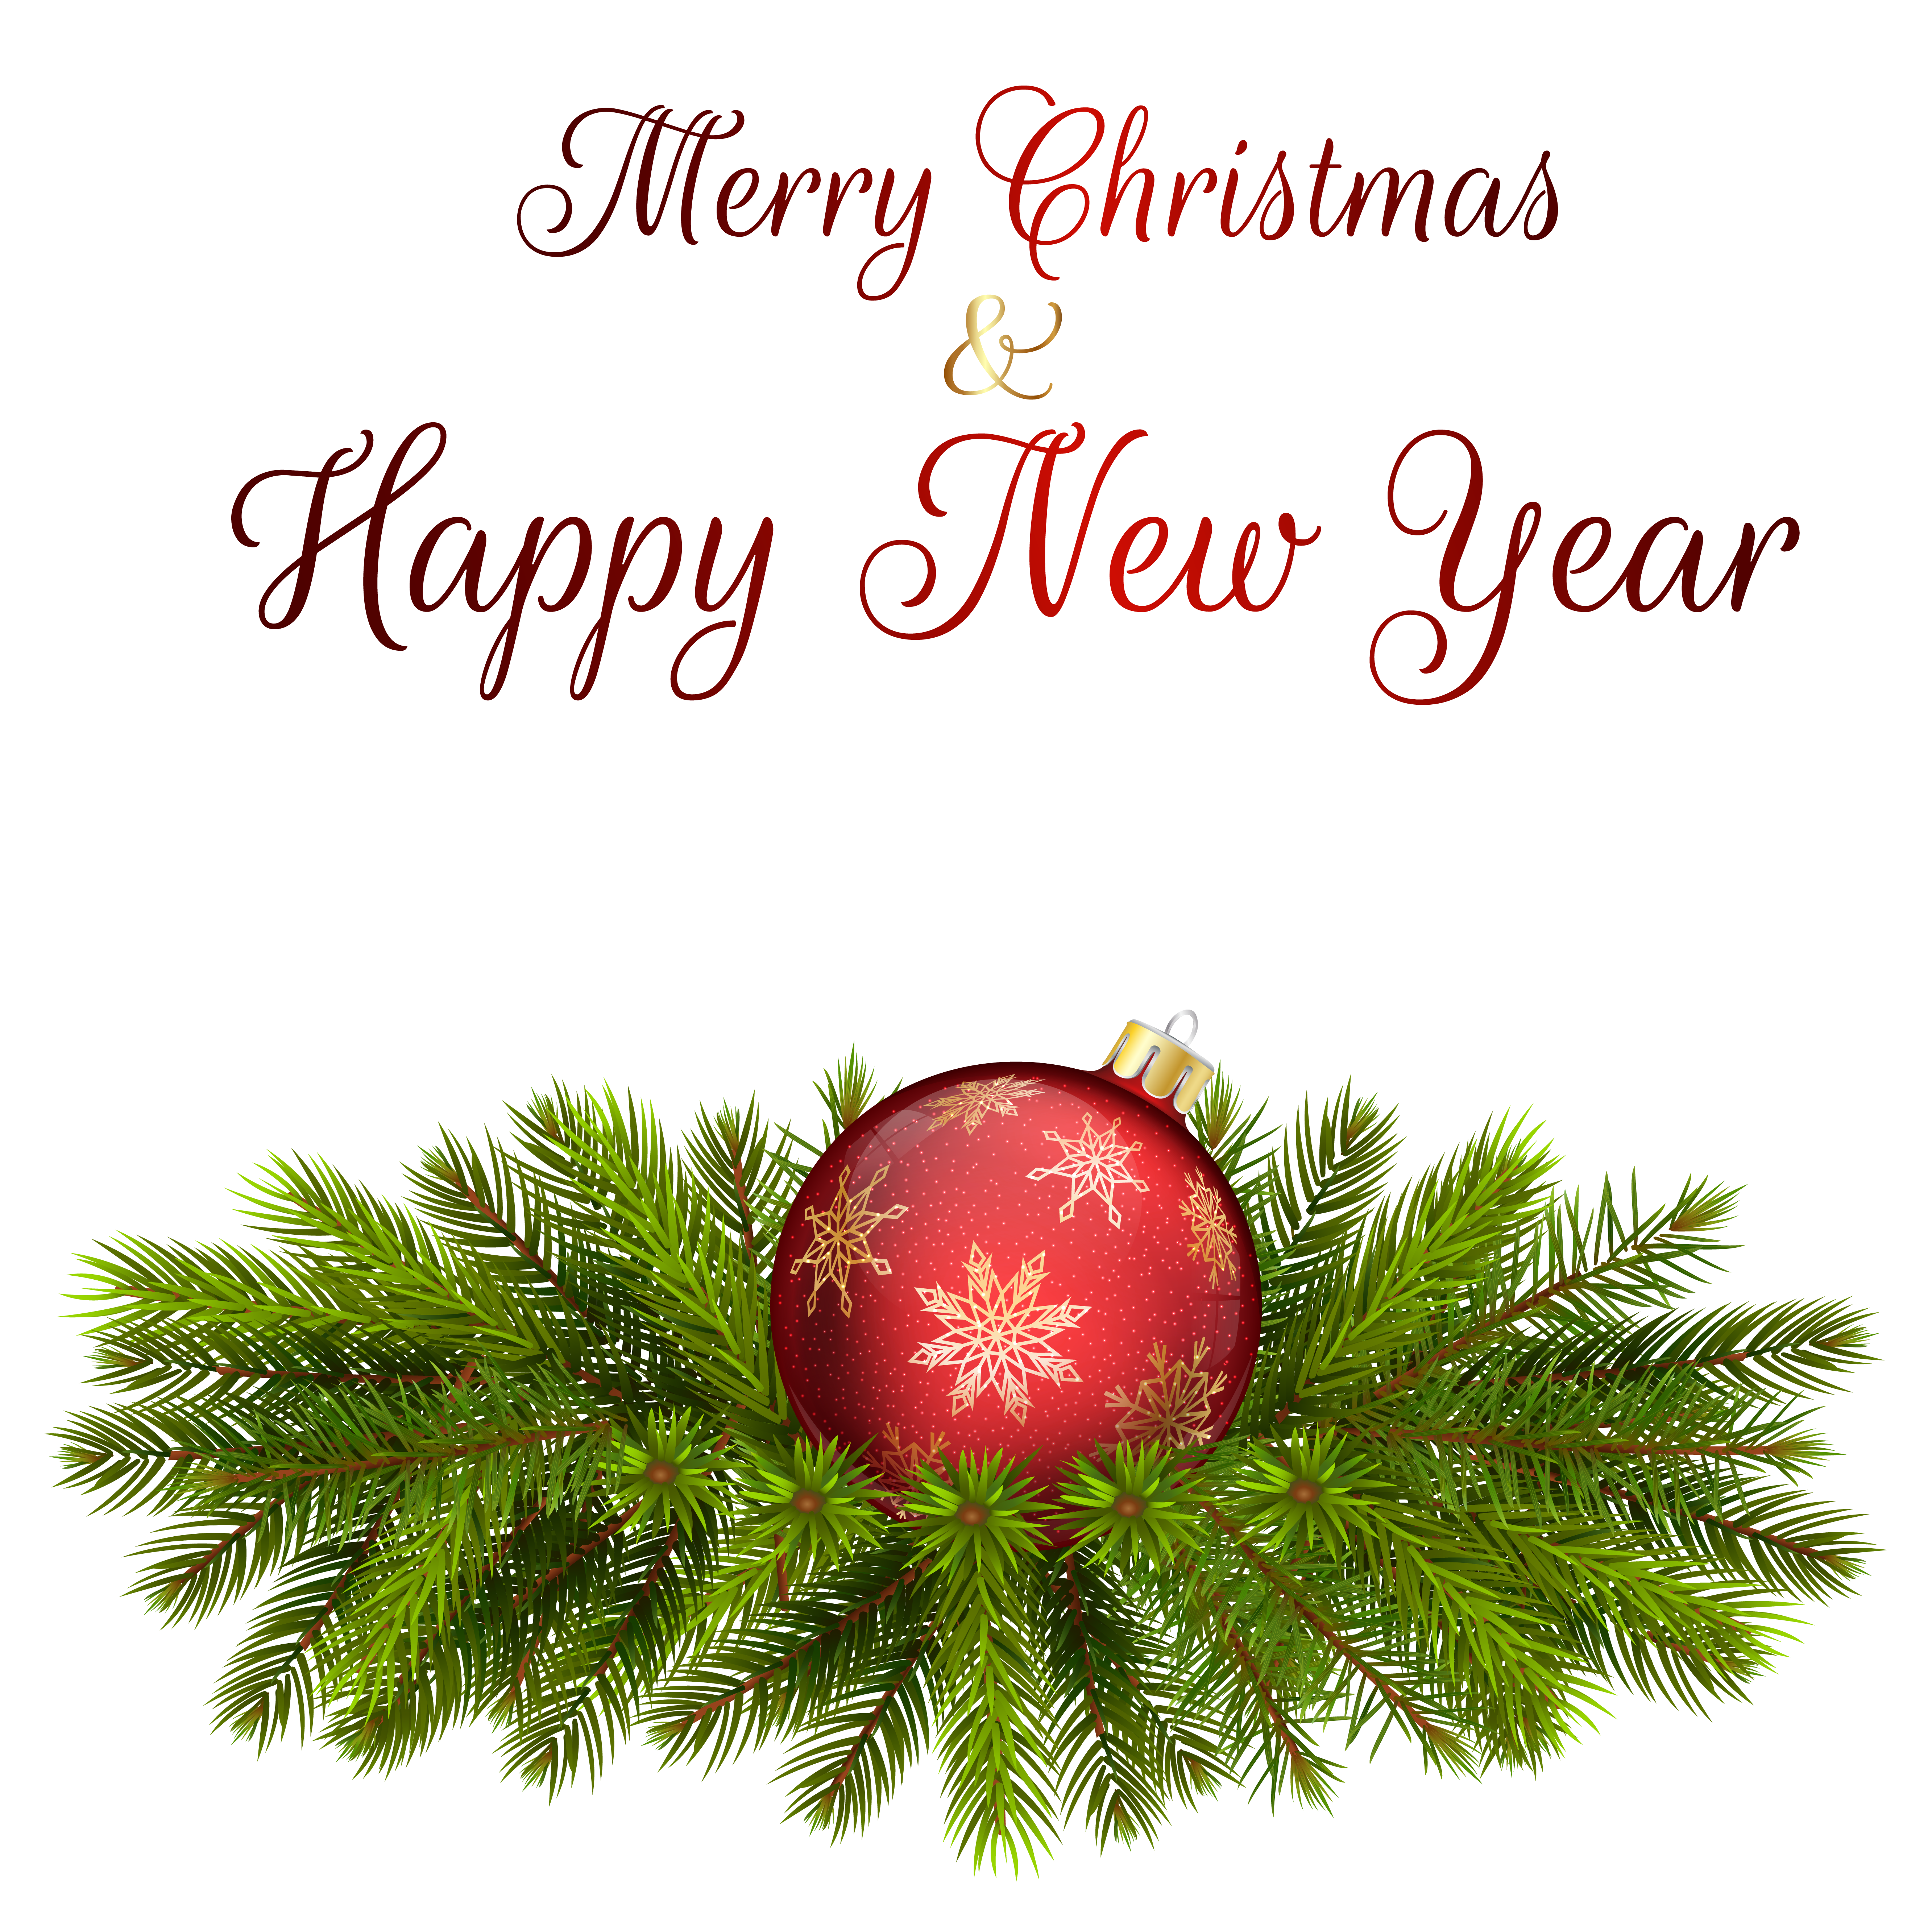 merry christmas clip art free download - photo #12